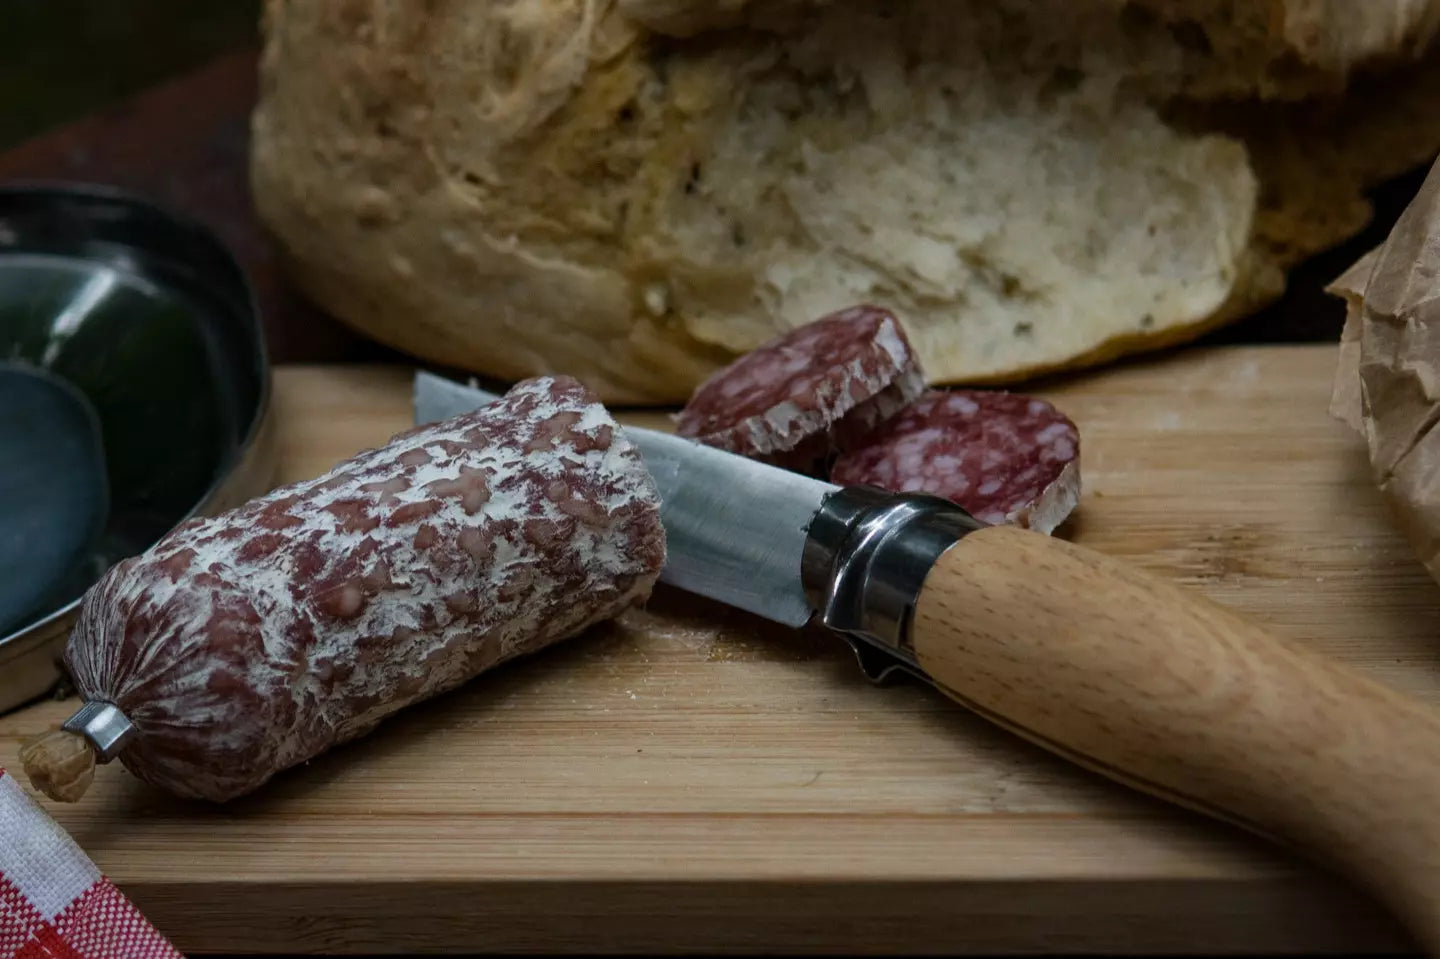 French The flavors and - Salami - of Elsass diversity Gastro traditions